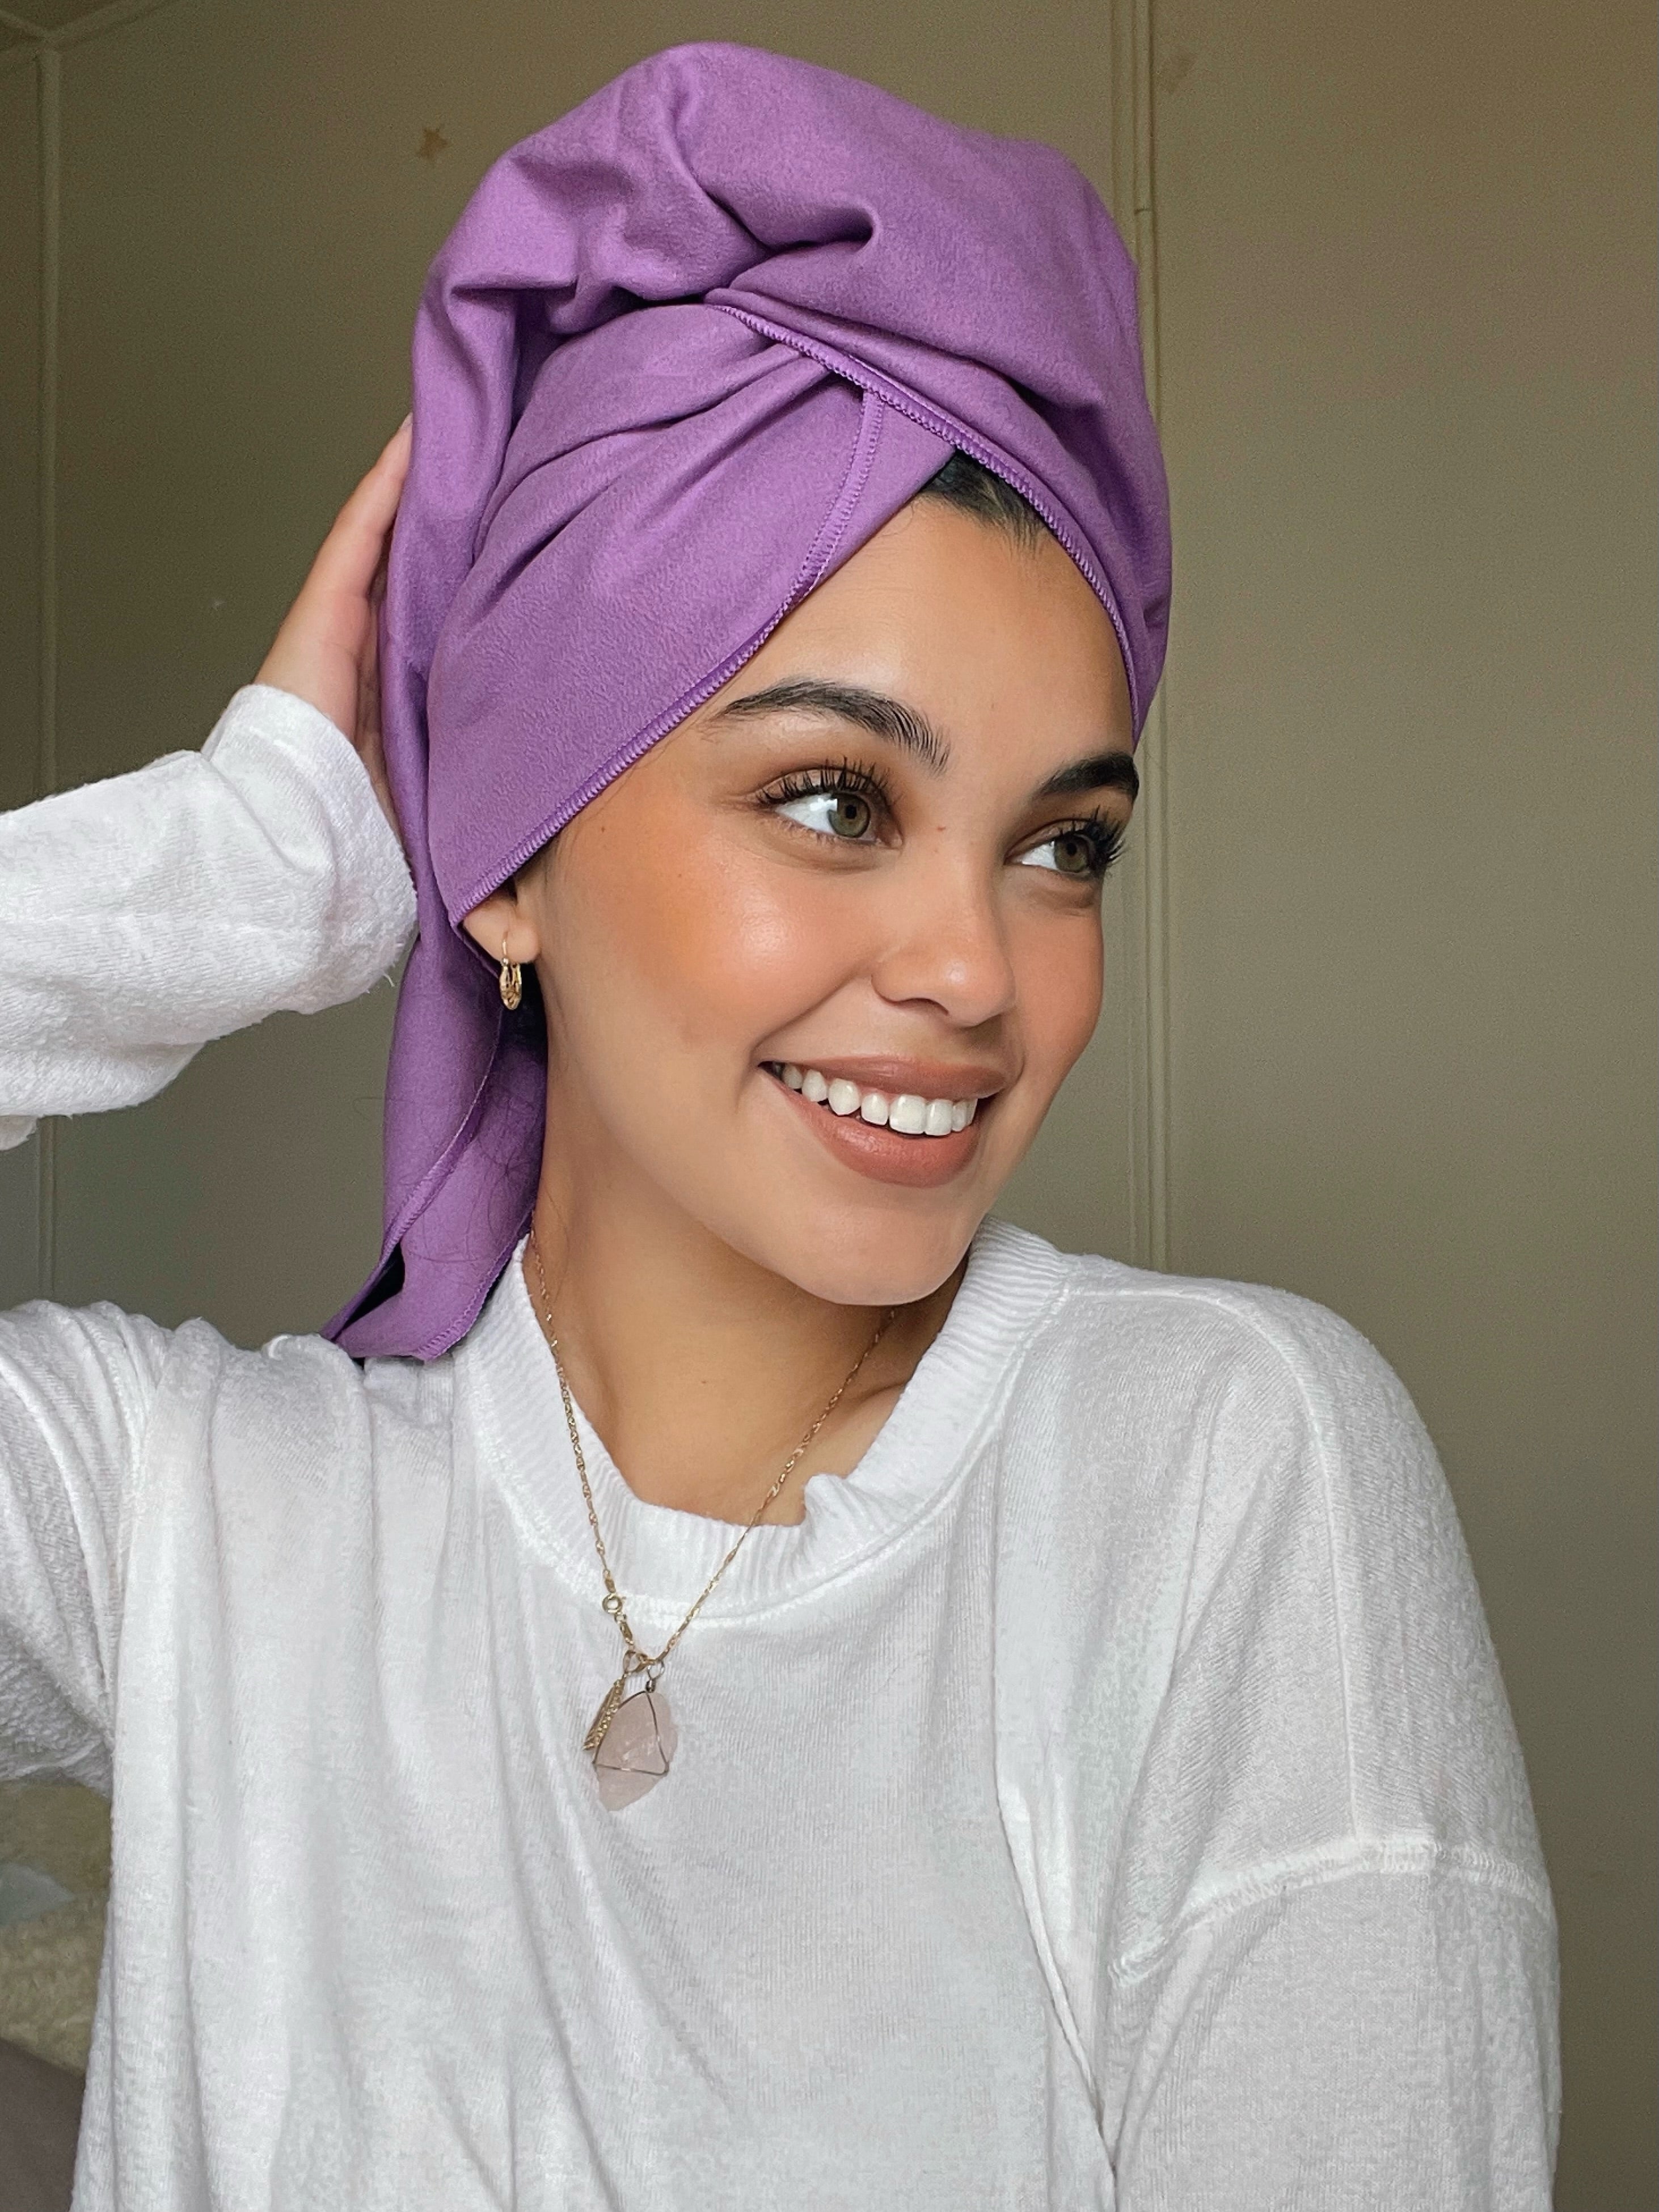 How to Create a Turban With a Towel to Dry Wet Hair: 12 Steps